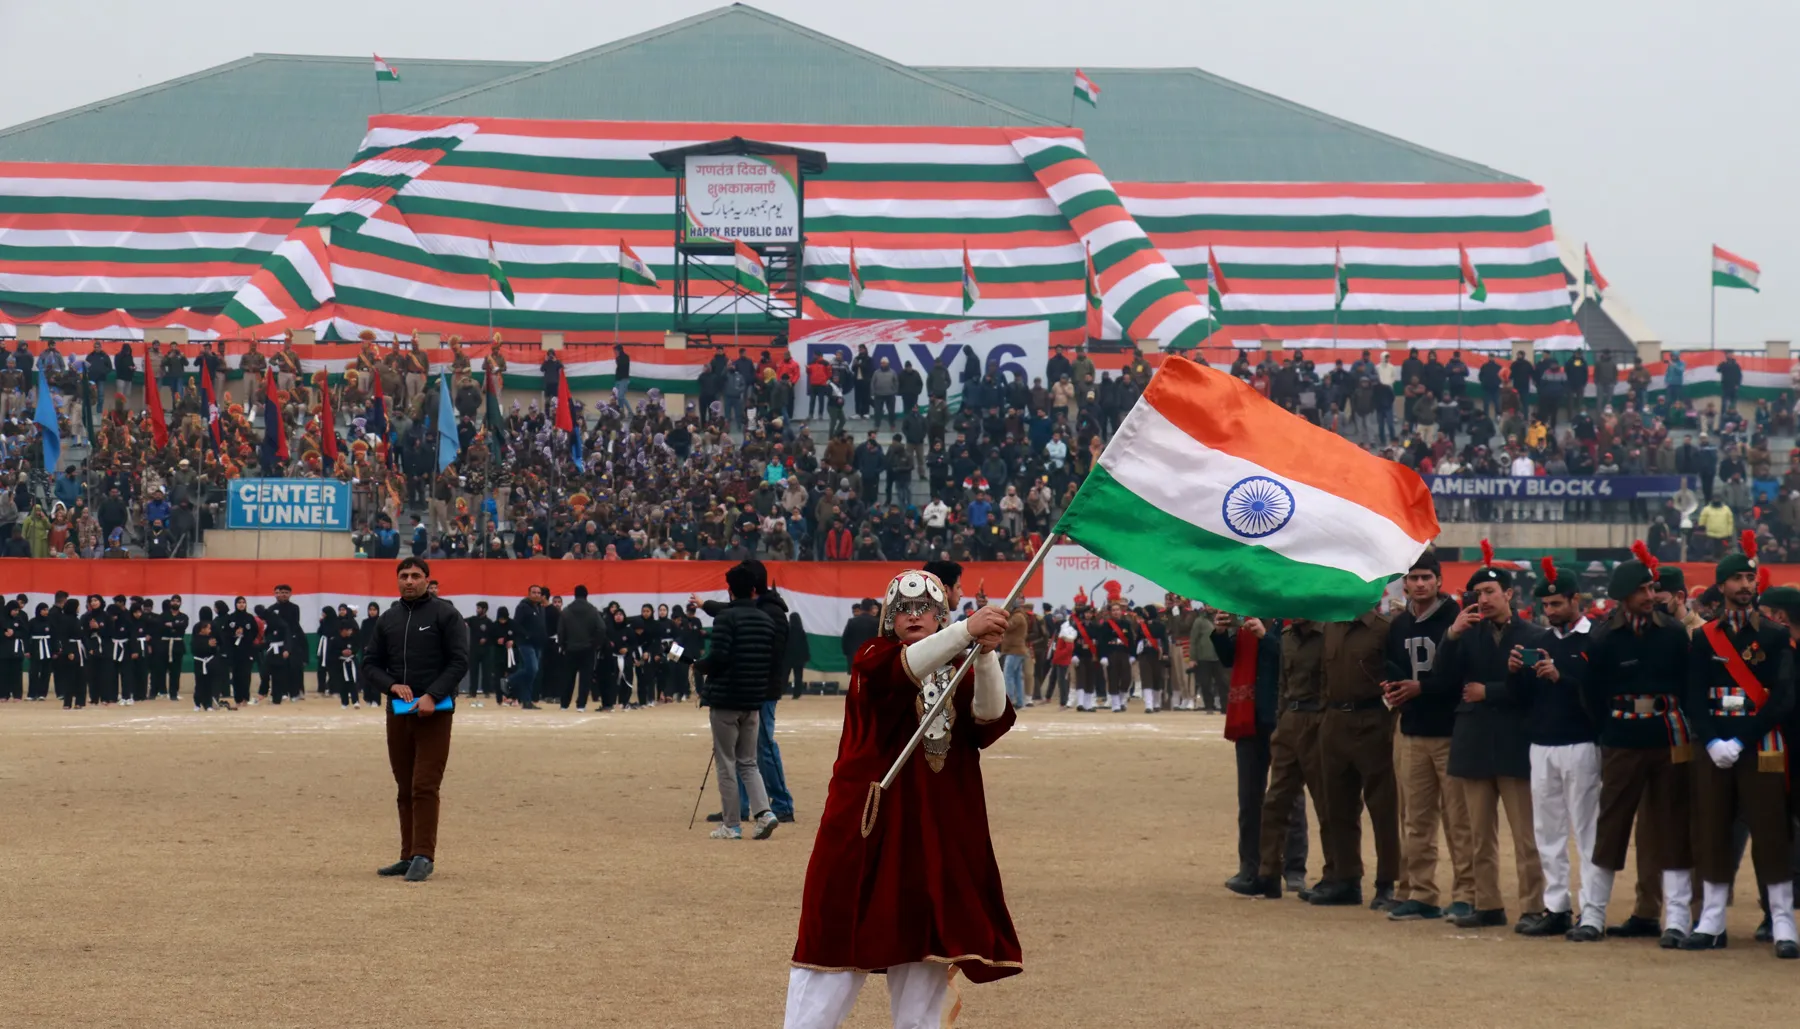 A woman waves the national flag during the Republic Day function at Bakshi stadium in Srinagar on Friday. Mubashir Khan for Greater Kashmir